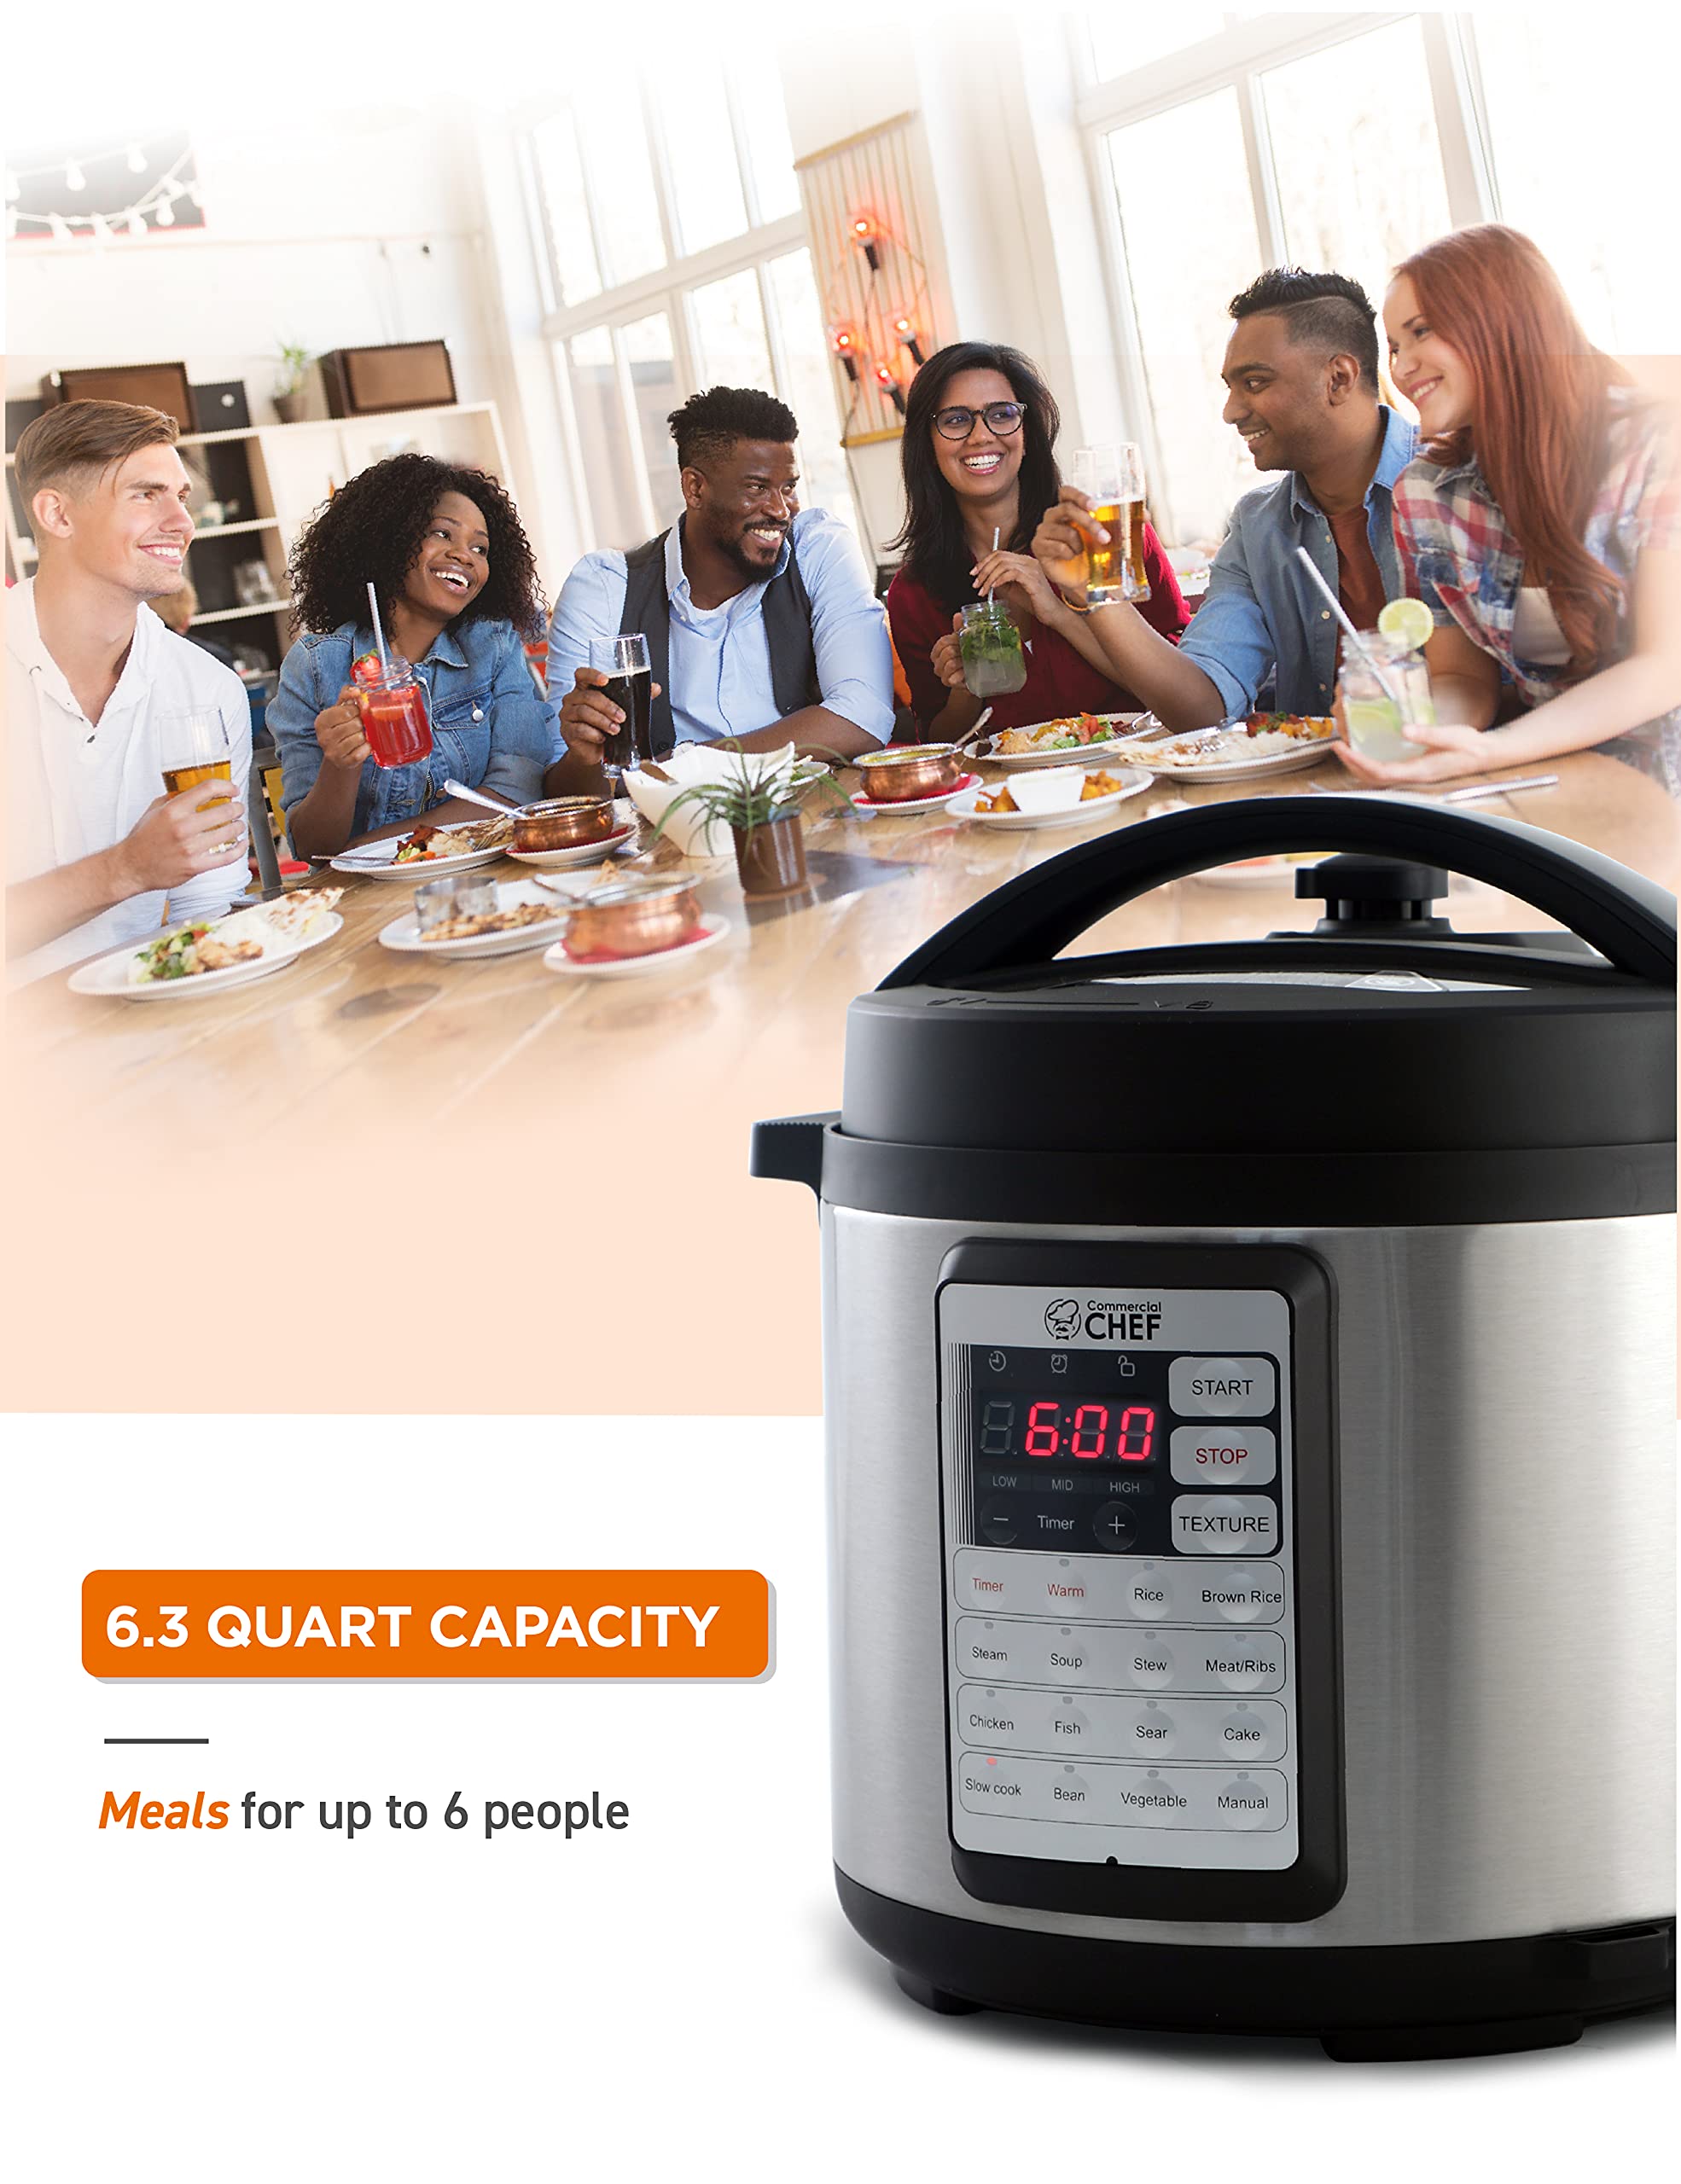 Commercial Chef 13-in-1 Electric Pressure Cooker